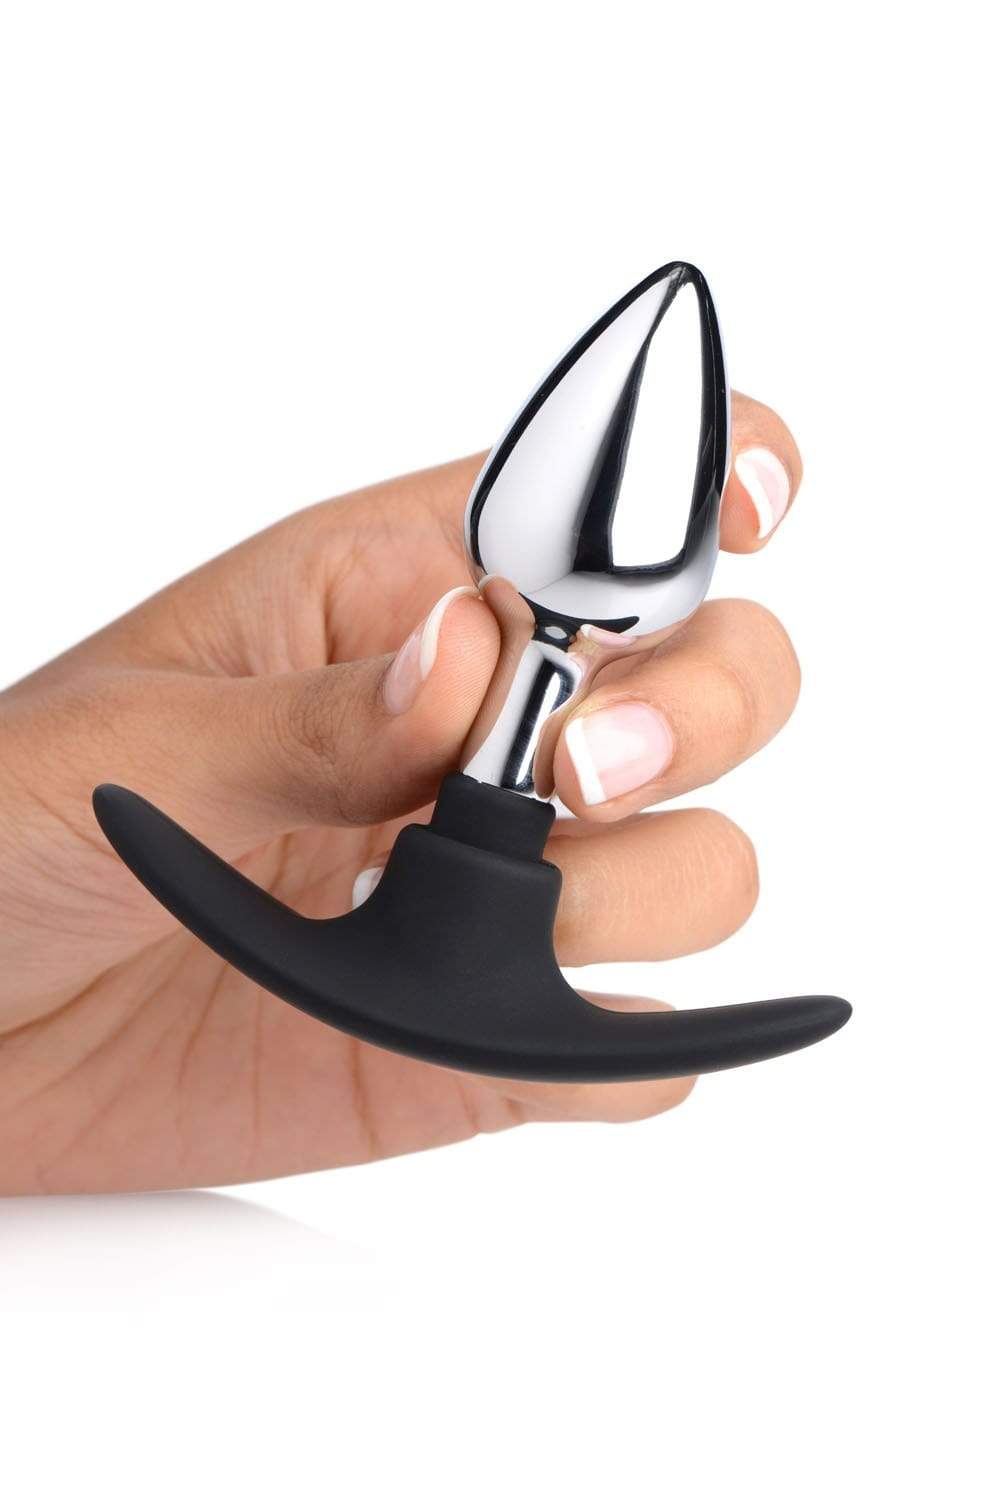 dark invader metal and silicone anal plug small